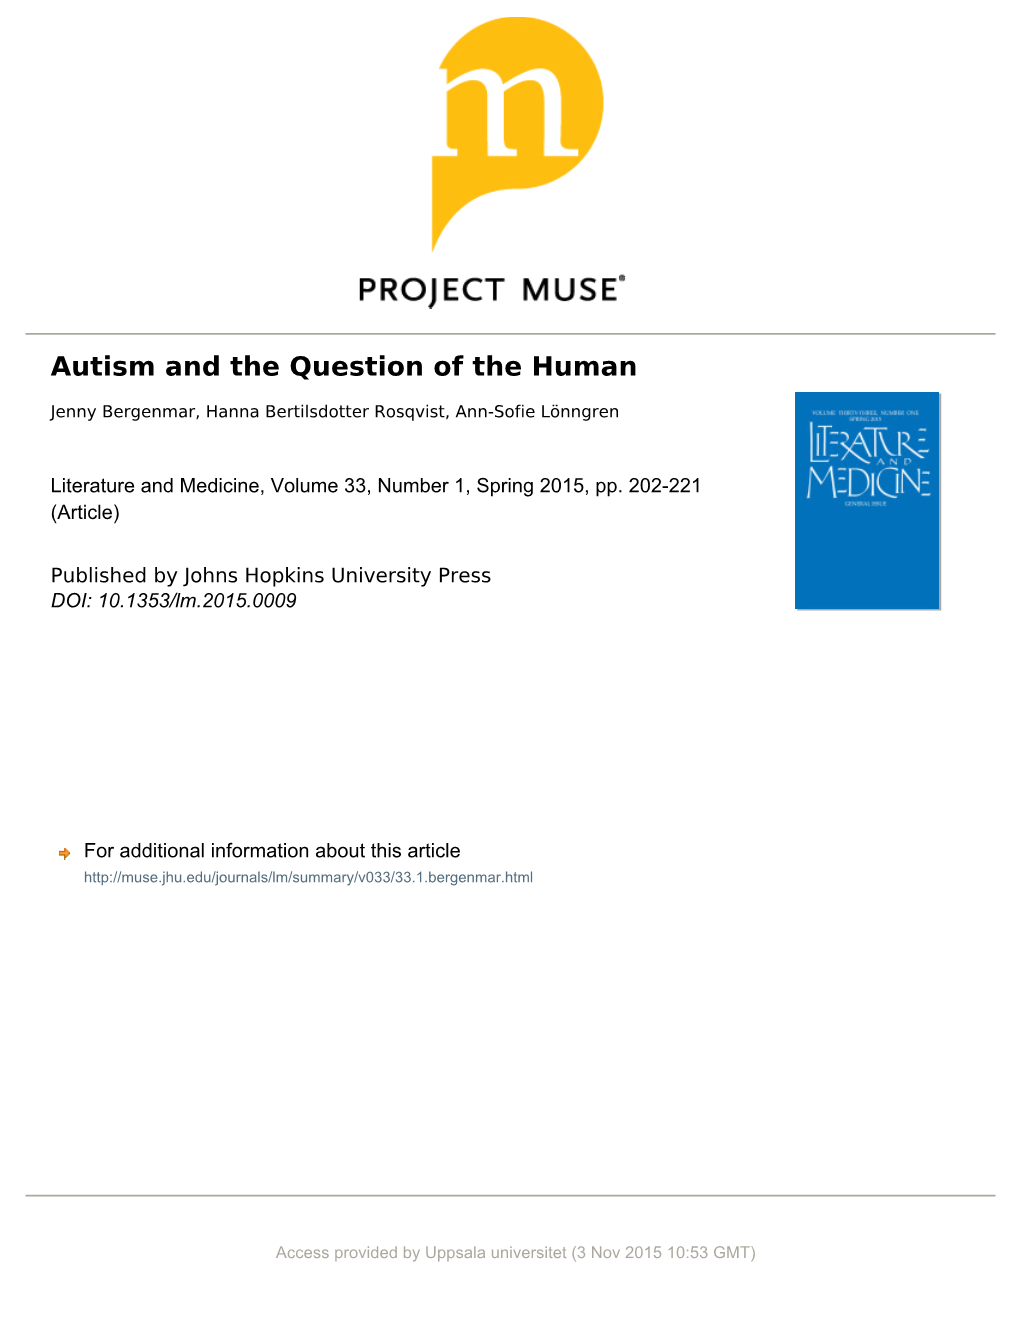 Autism and the Question of the Human